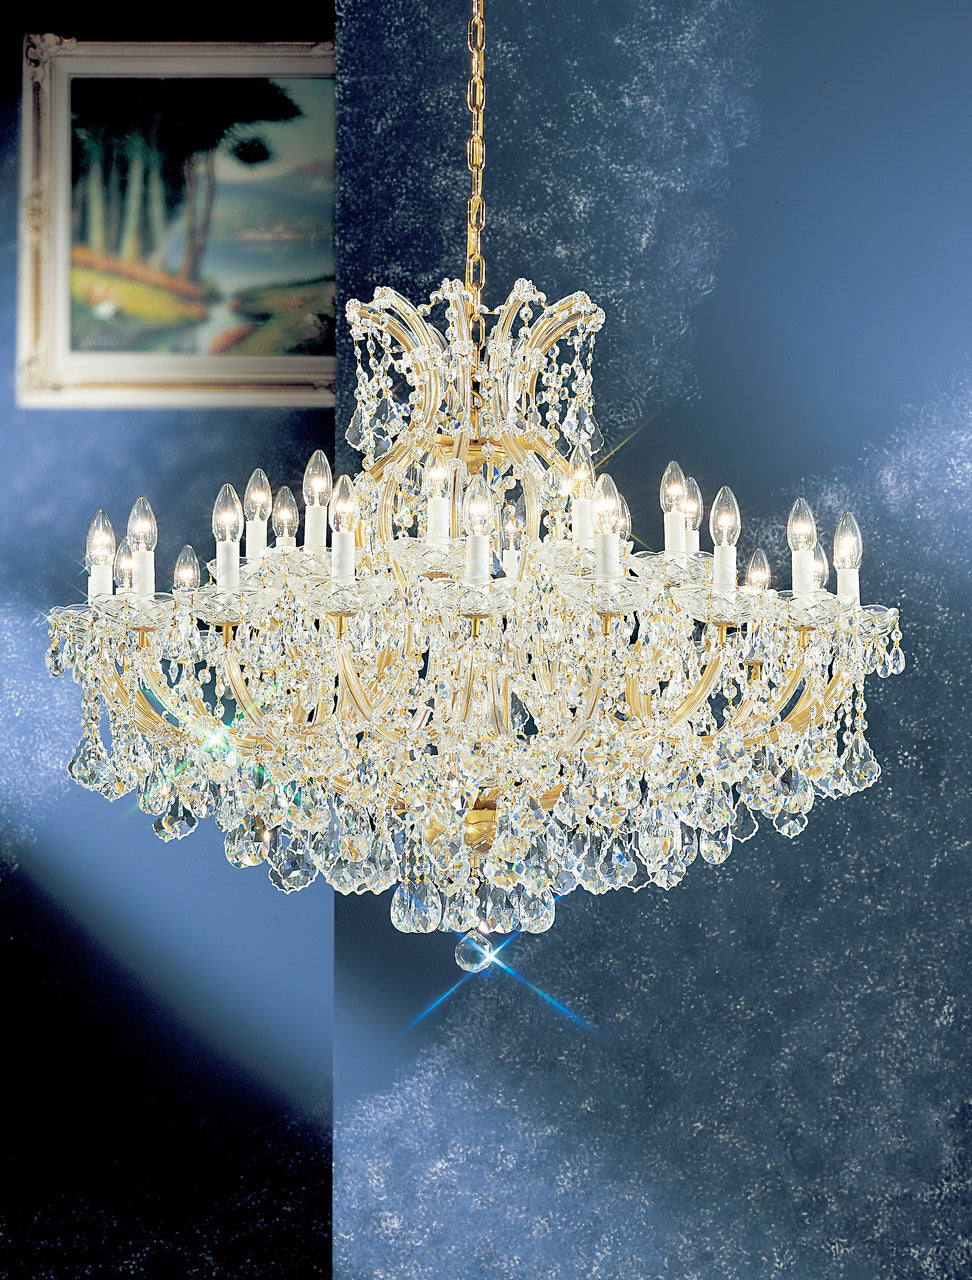 Classic Lighting 8160 OWG S Maria Theresa Traditional Crystal Chandelier in Olde World Gold (Imported from Italy)